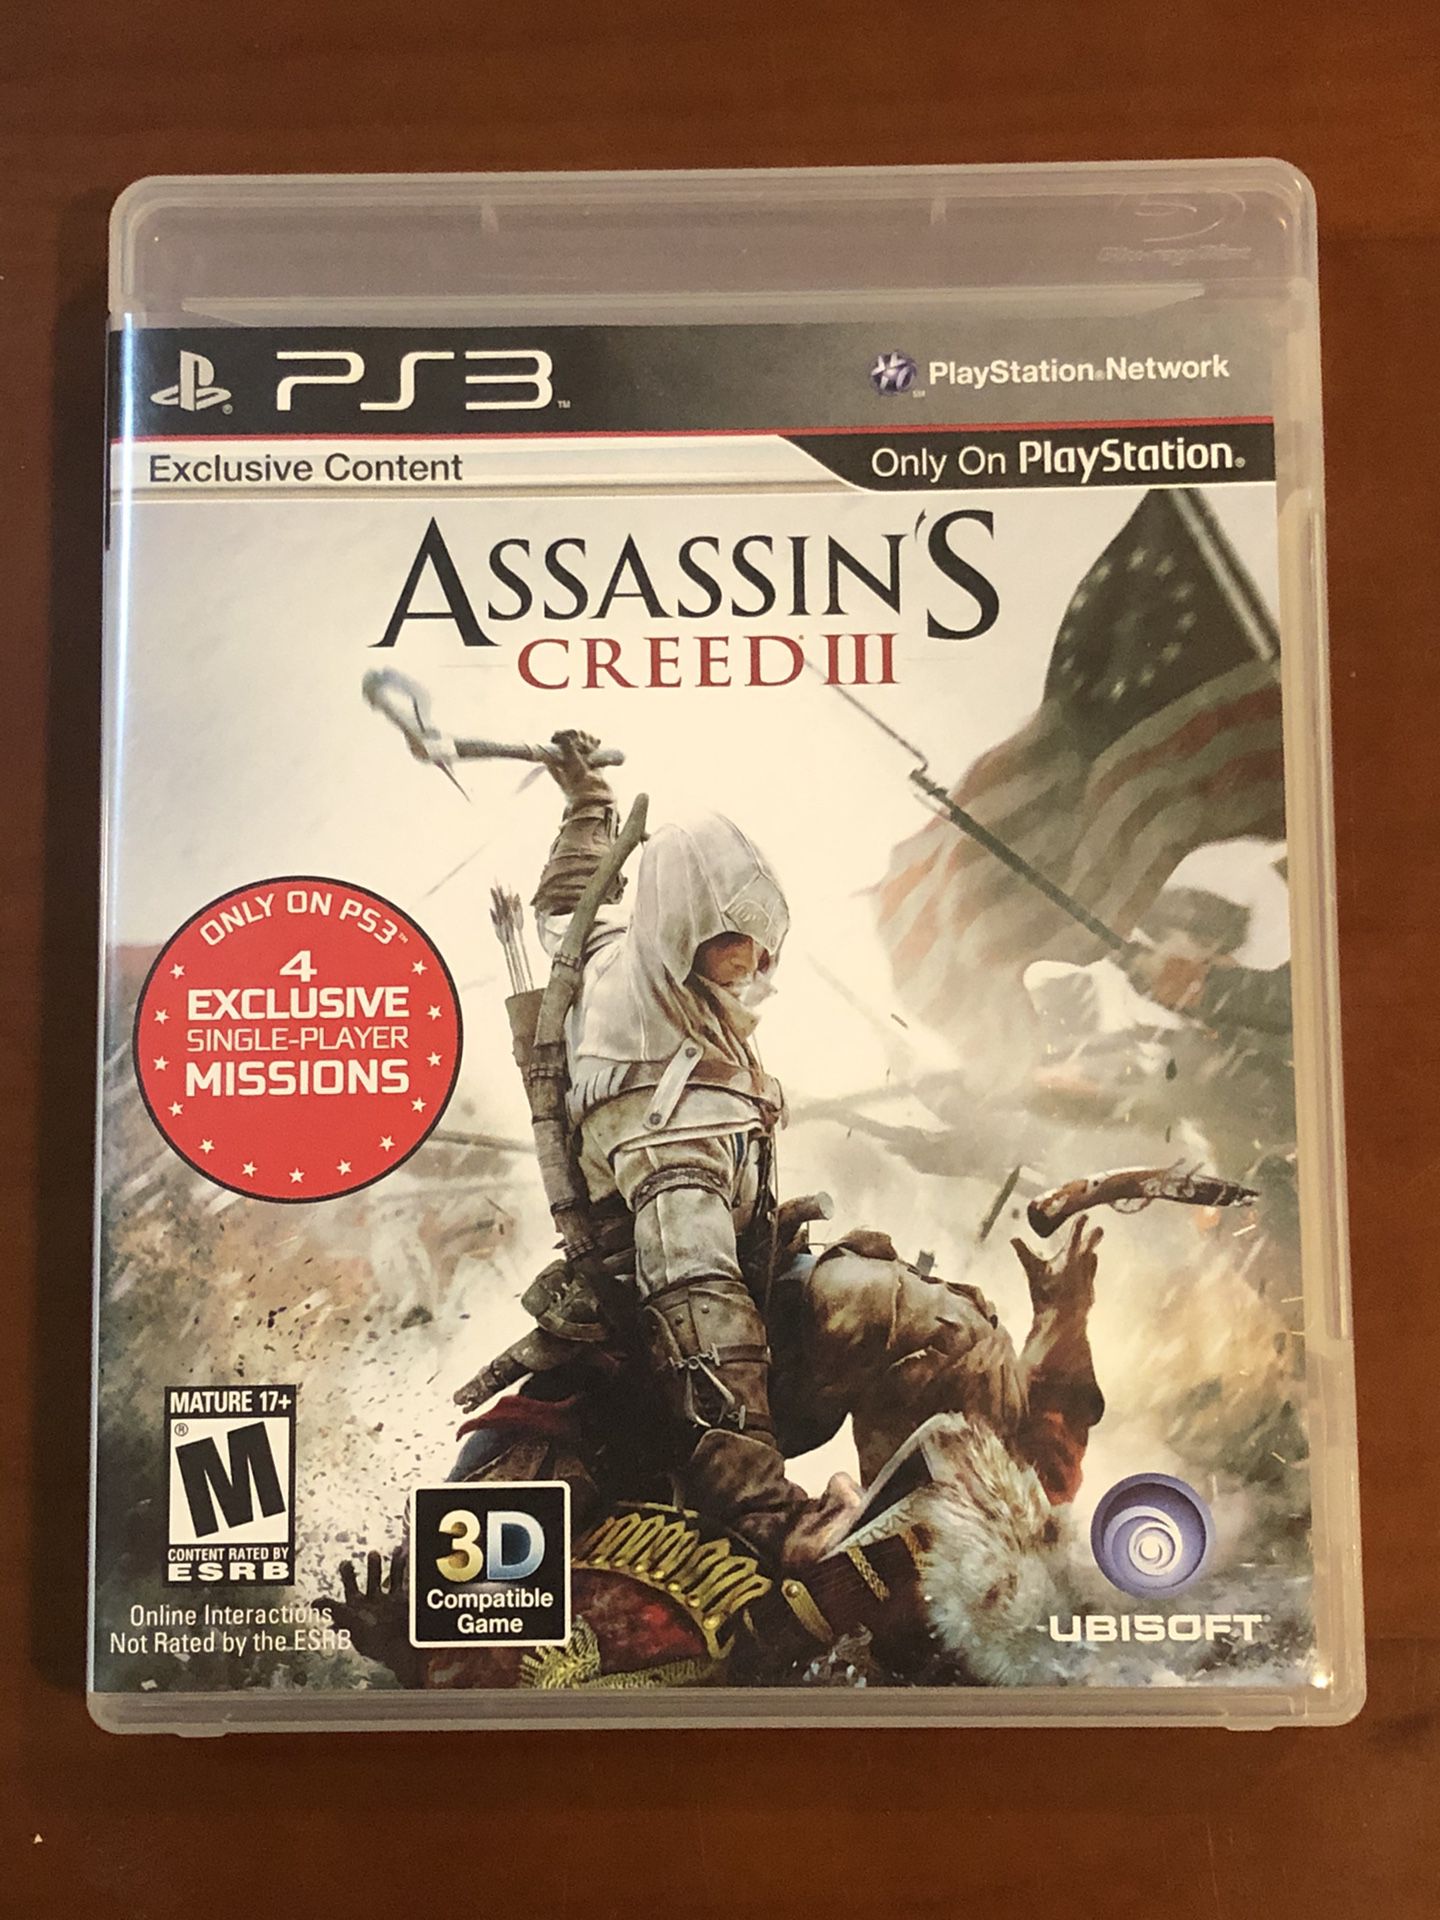 Assassin’s Creed III for PS3